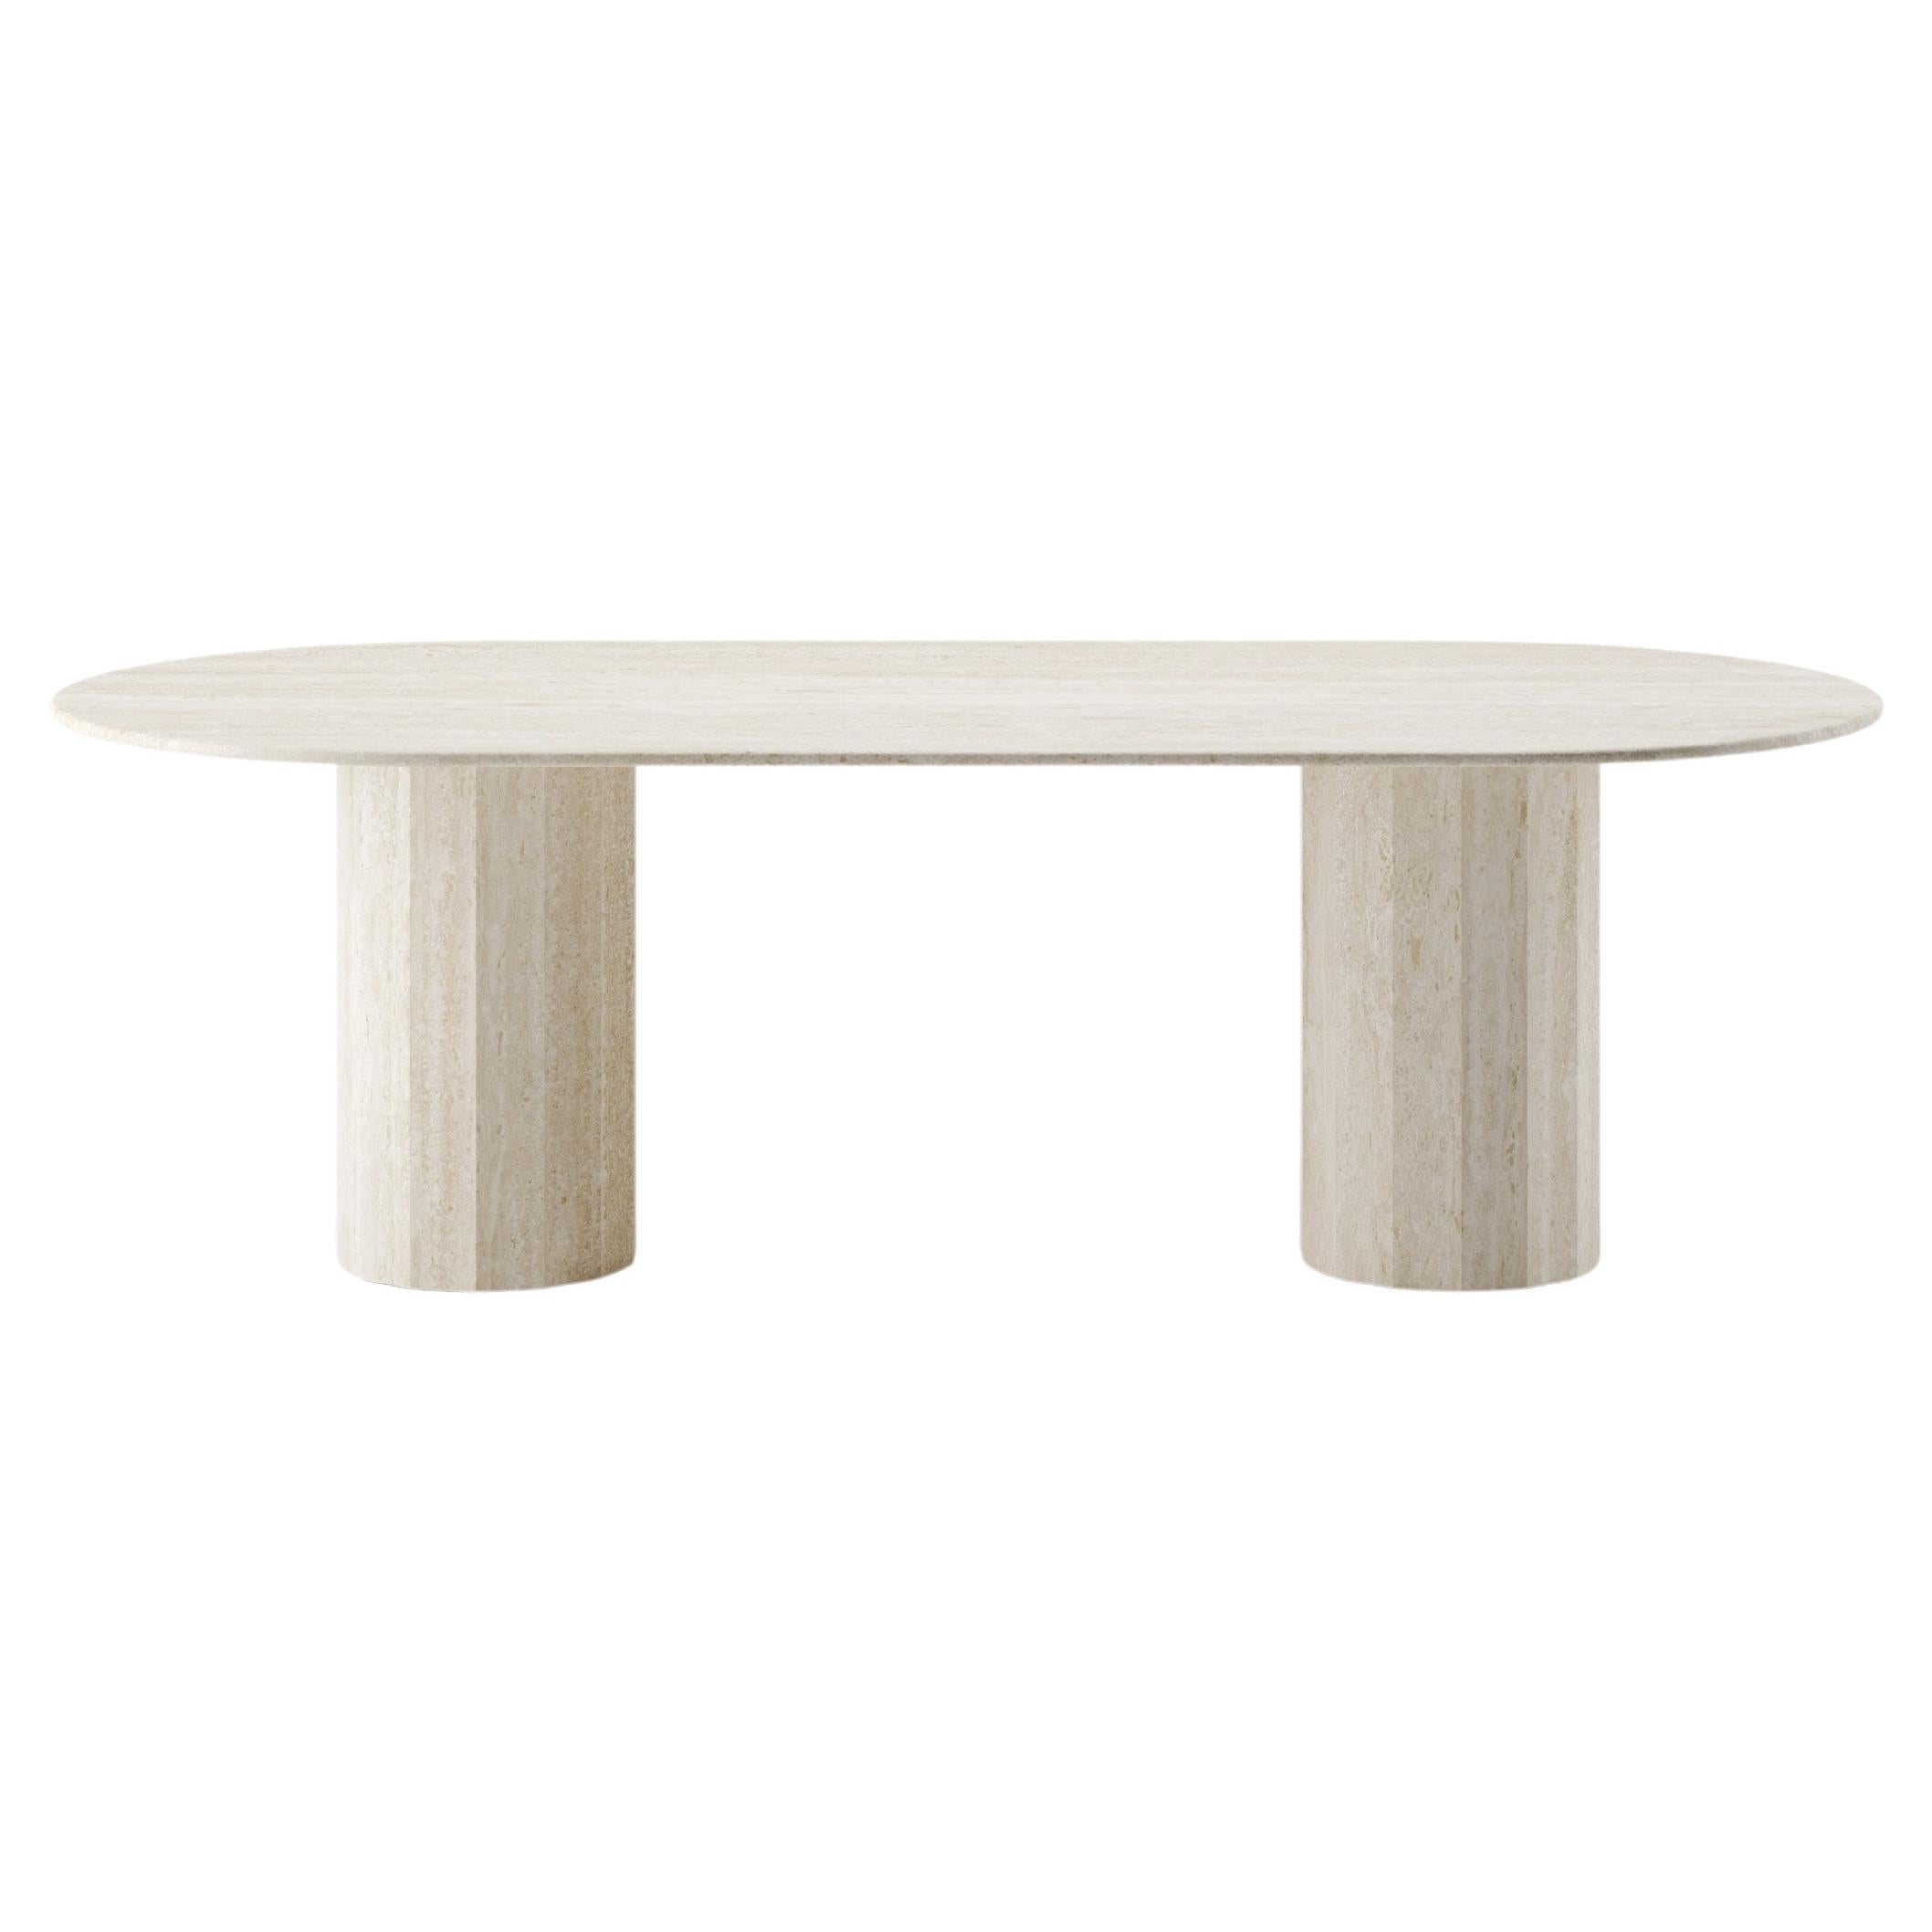 Palladian 240cm/94.4" Oval Dining Table in Natural Travertine For Sale